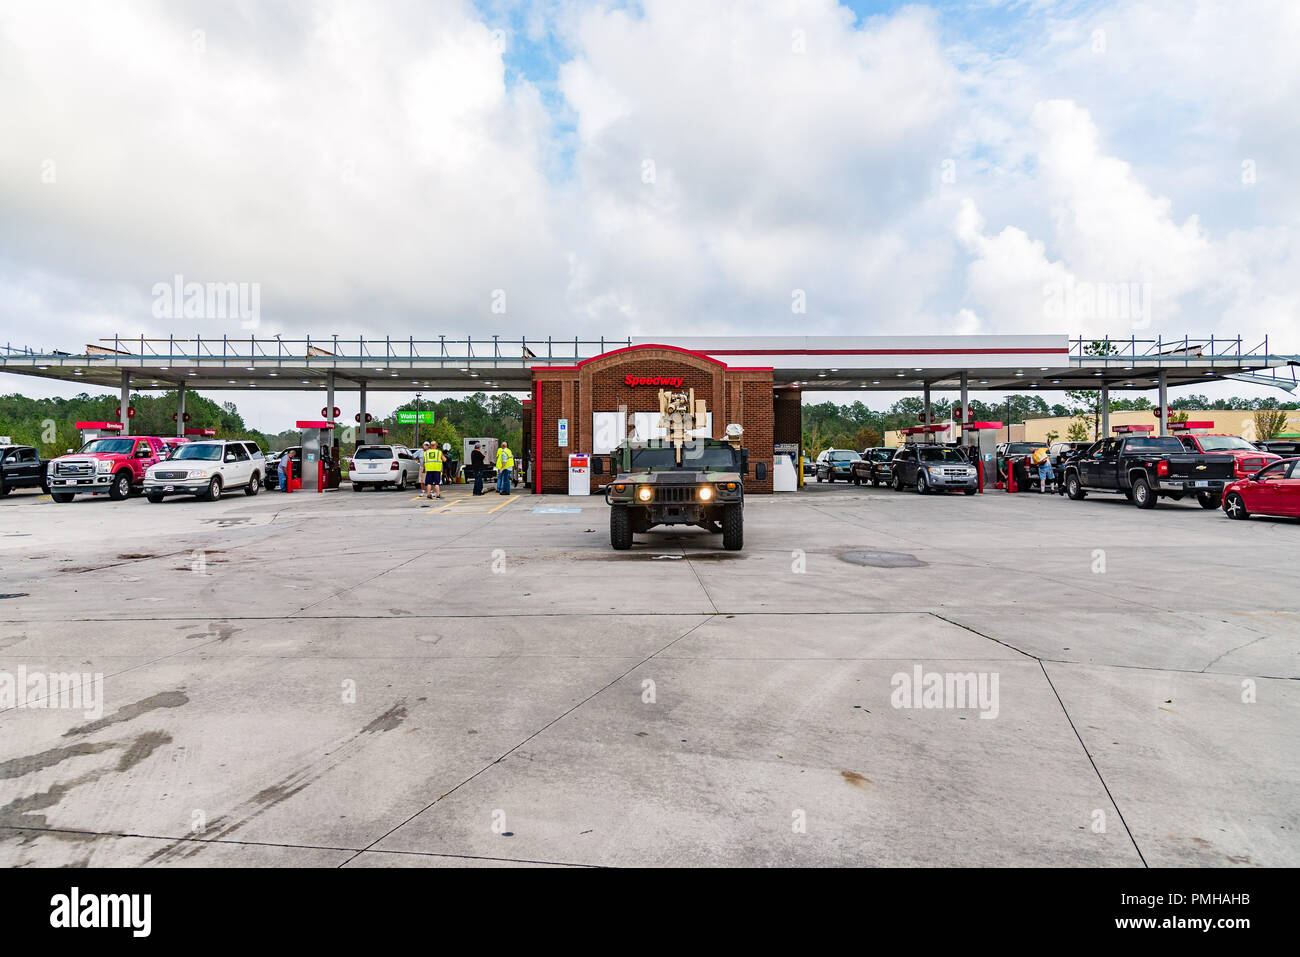 Maryland, USA. 26th Sep, 2018. September 16, 2018, Newport, NC- Local and US Military police were on guard and organizing distribution of fuel at Speedway fueling station on US-70 at Roberts Rd. Credit: Michael Jordan/ZUMA Wire/Alamy Live News Stock Photo